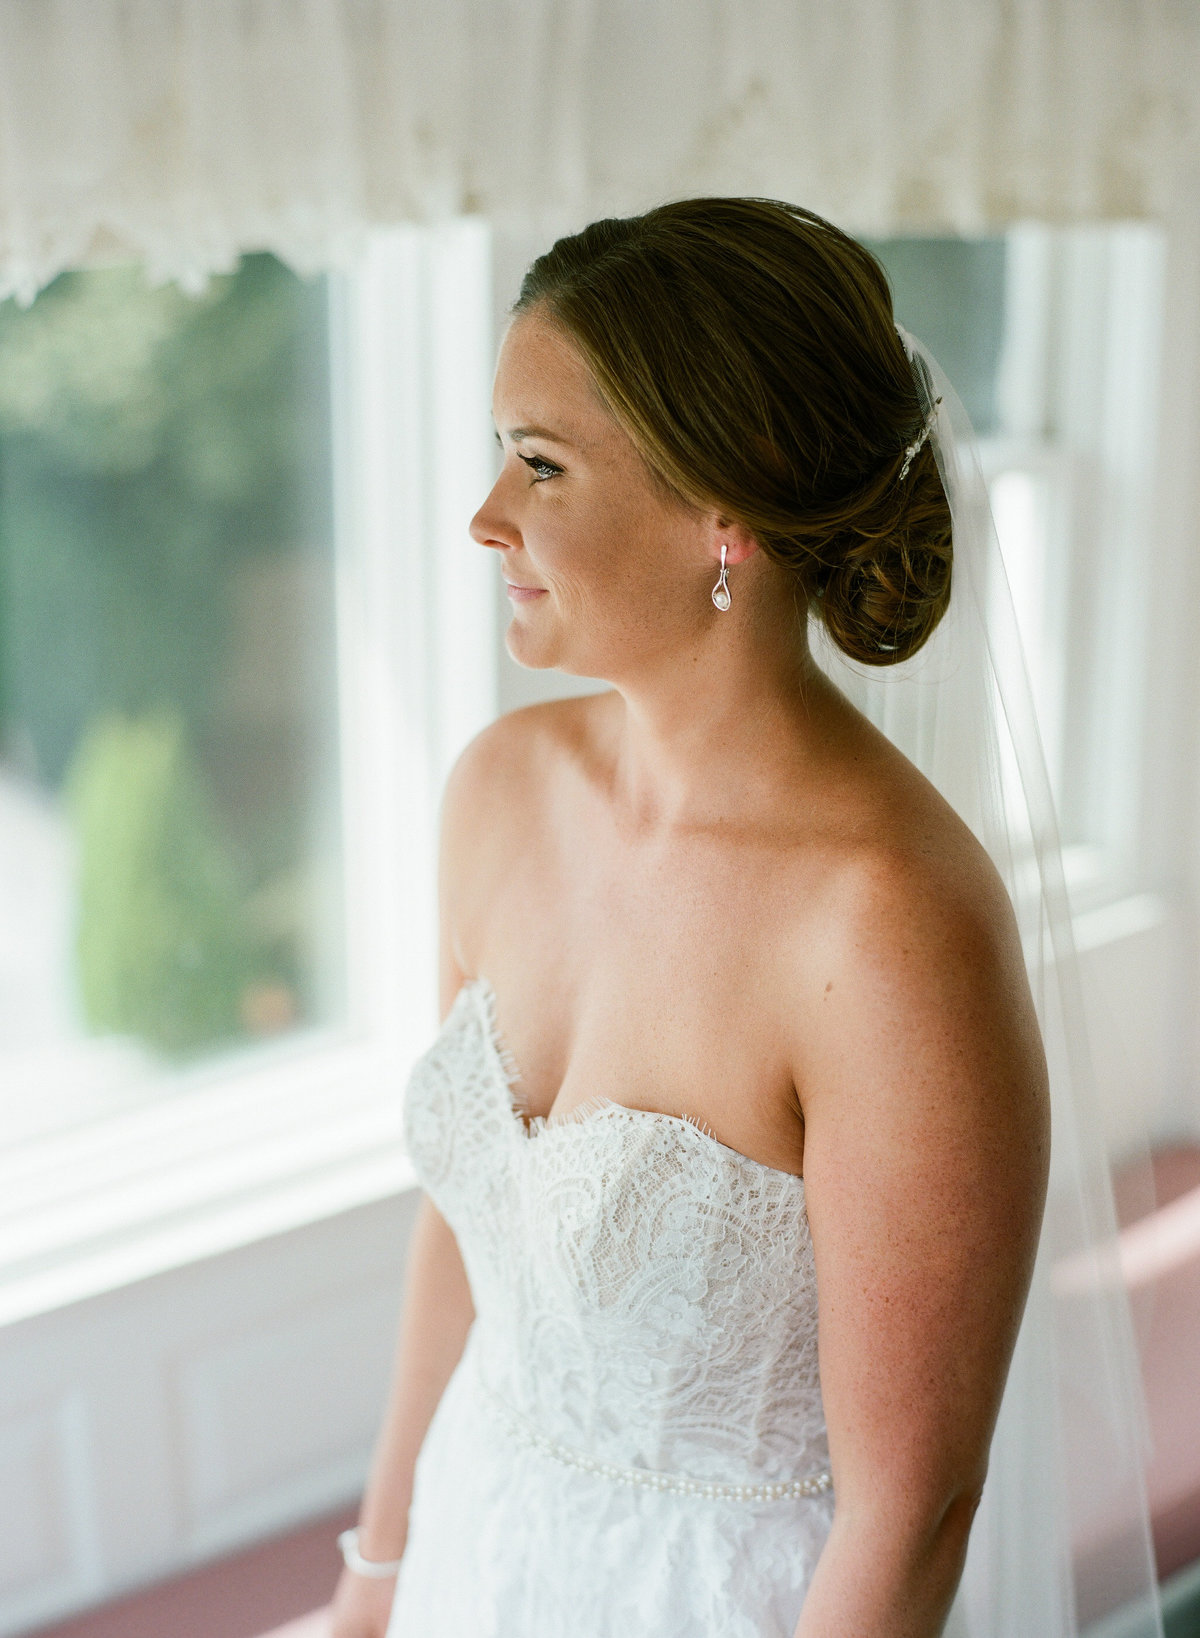 Bride looks out window on wedding day